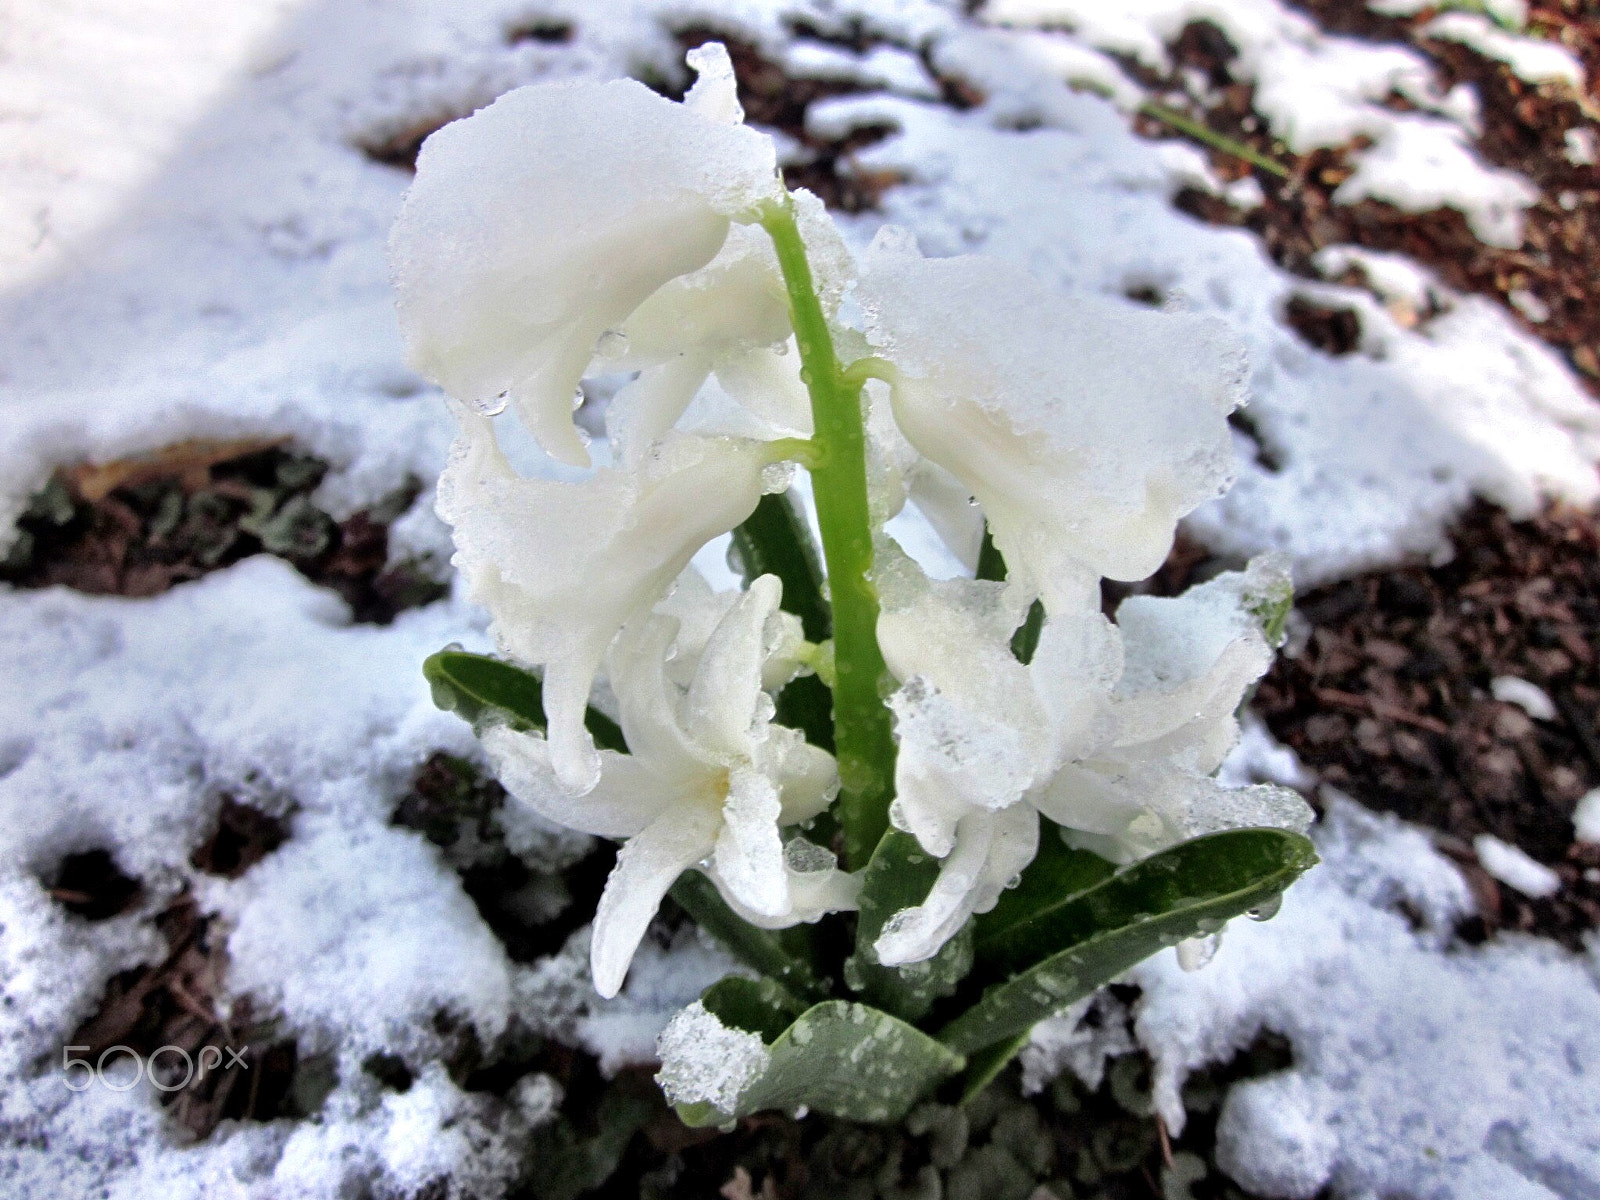 Canon PowerShot SD1300 IS (IXUS 105 / IXY 200F) sample photo. Late spring snow covering hyacinth flowers photography